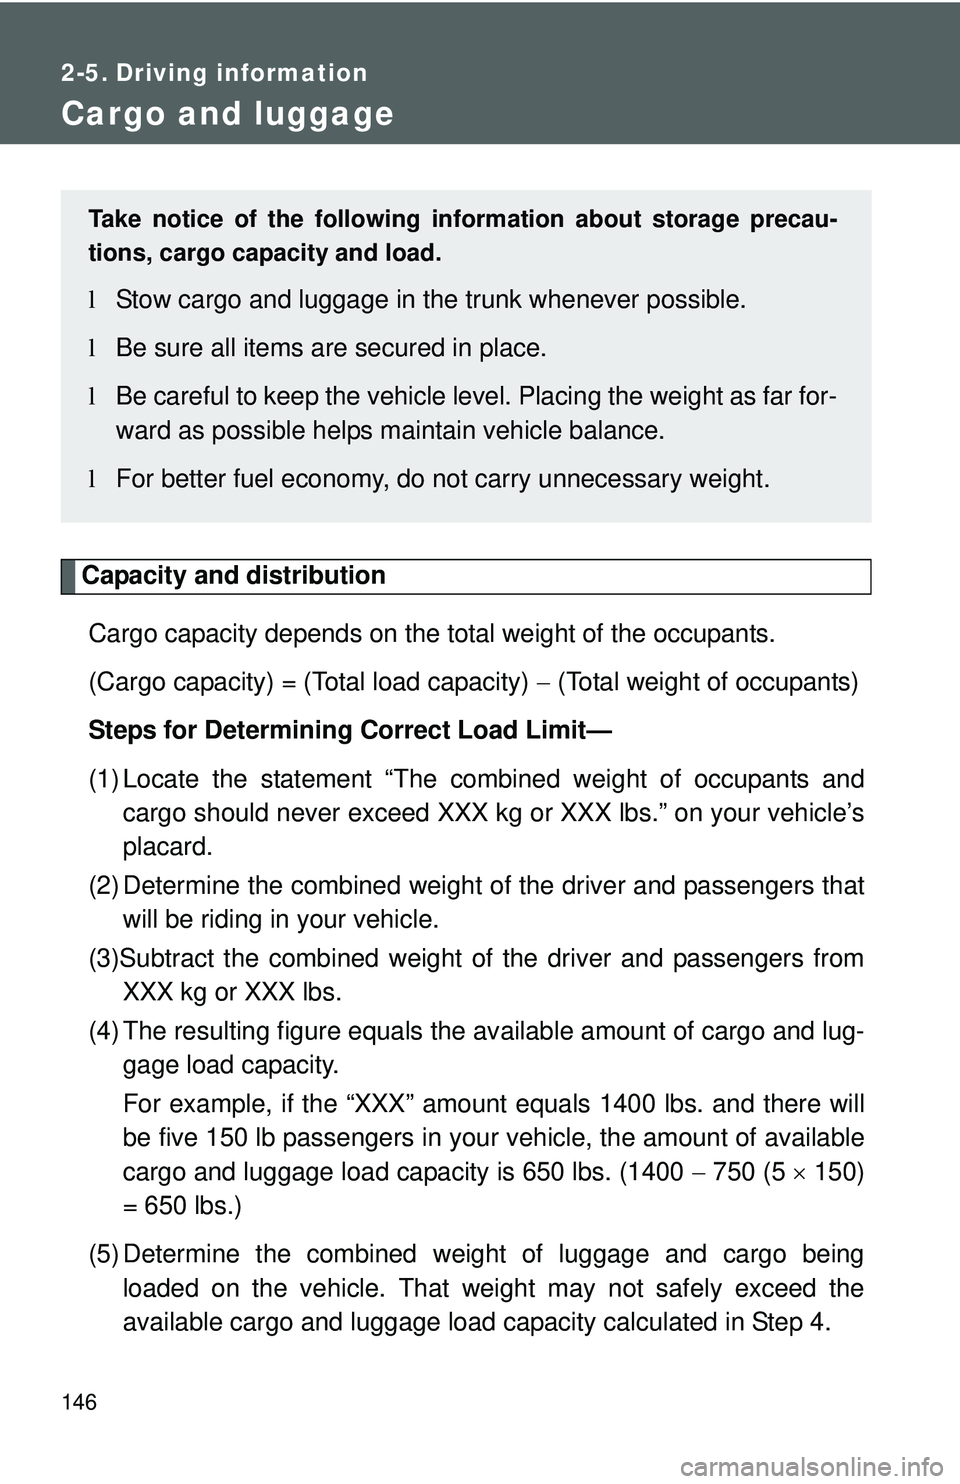 TOYOTA YARIS SEDAN 2011  Owners Manual 146
2-5. Driving information
Cargo and luggage
Capacity and distributionCargo capacity depends on the total weight of the occupants.
(Cargo capacity) = (Total load capacity)  − (Total weight of occu